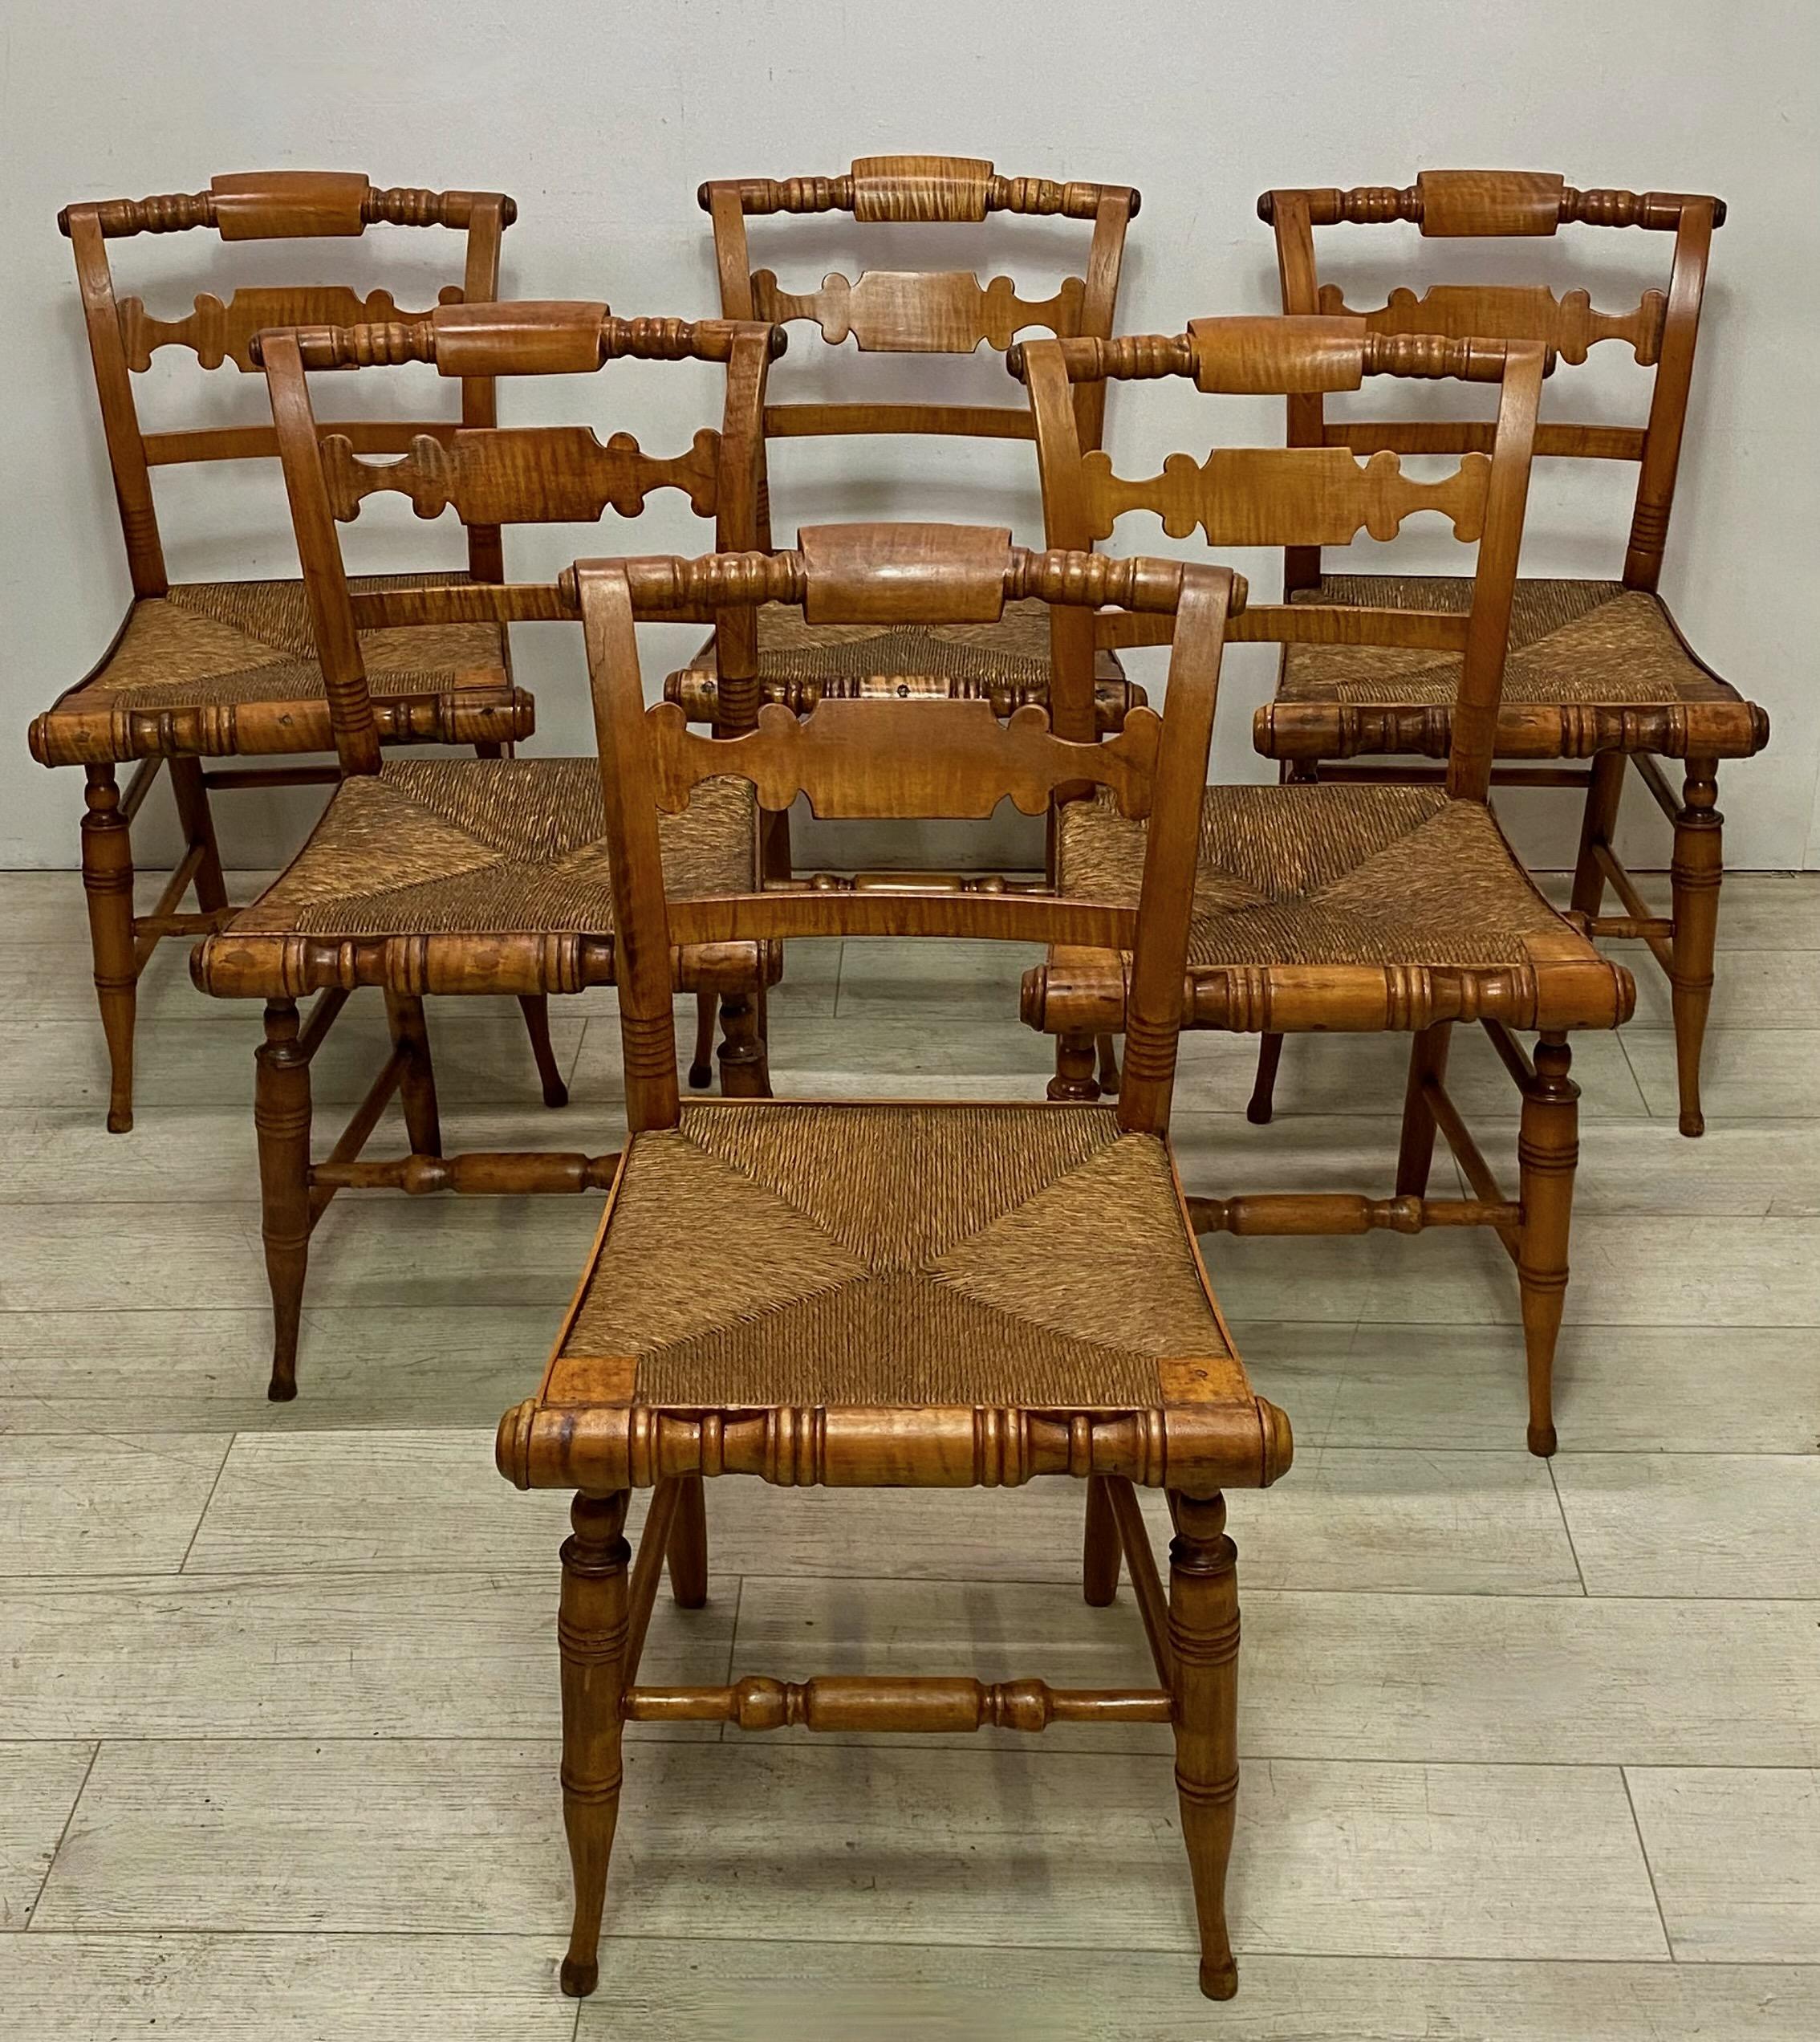 An unusually good set of six maple wood Hitchcock style chairs with rush seats.
In excellent original antique condition. Sturdy and Sound.
Recently refinished, likely original rush seats (one with a stain, please see photo).
American early 19th